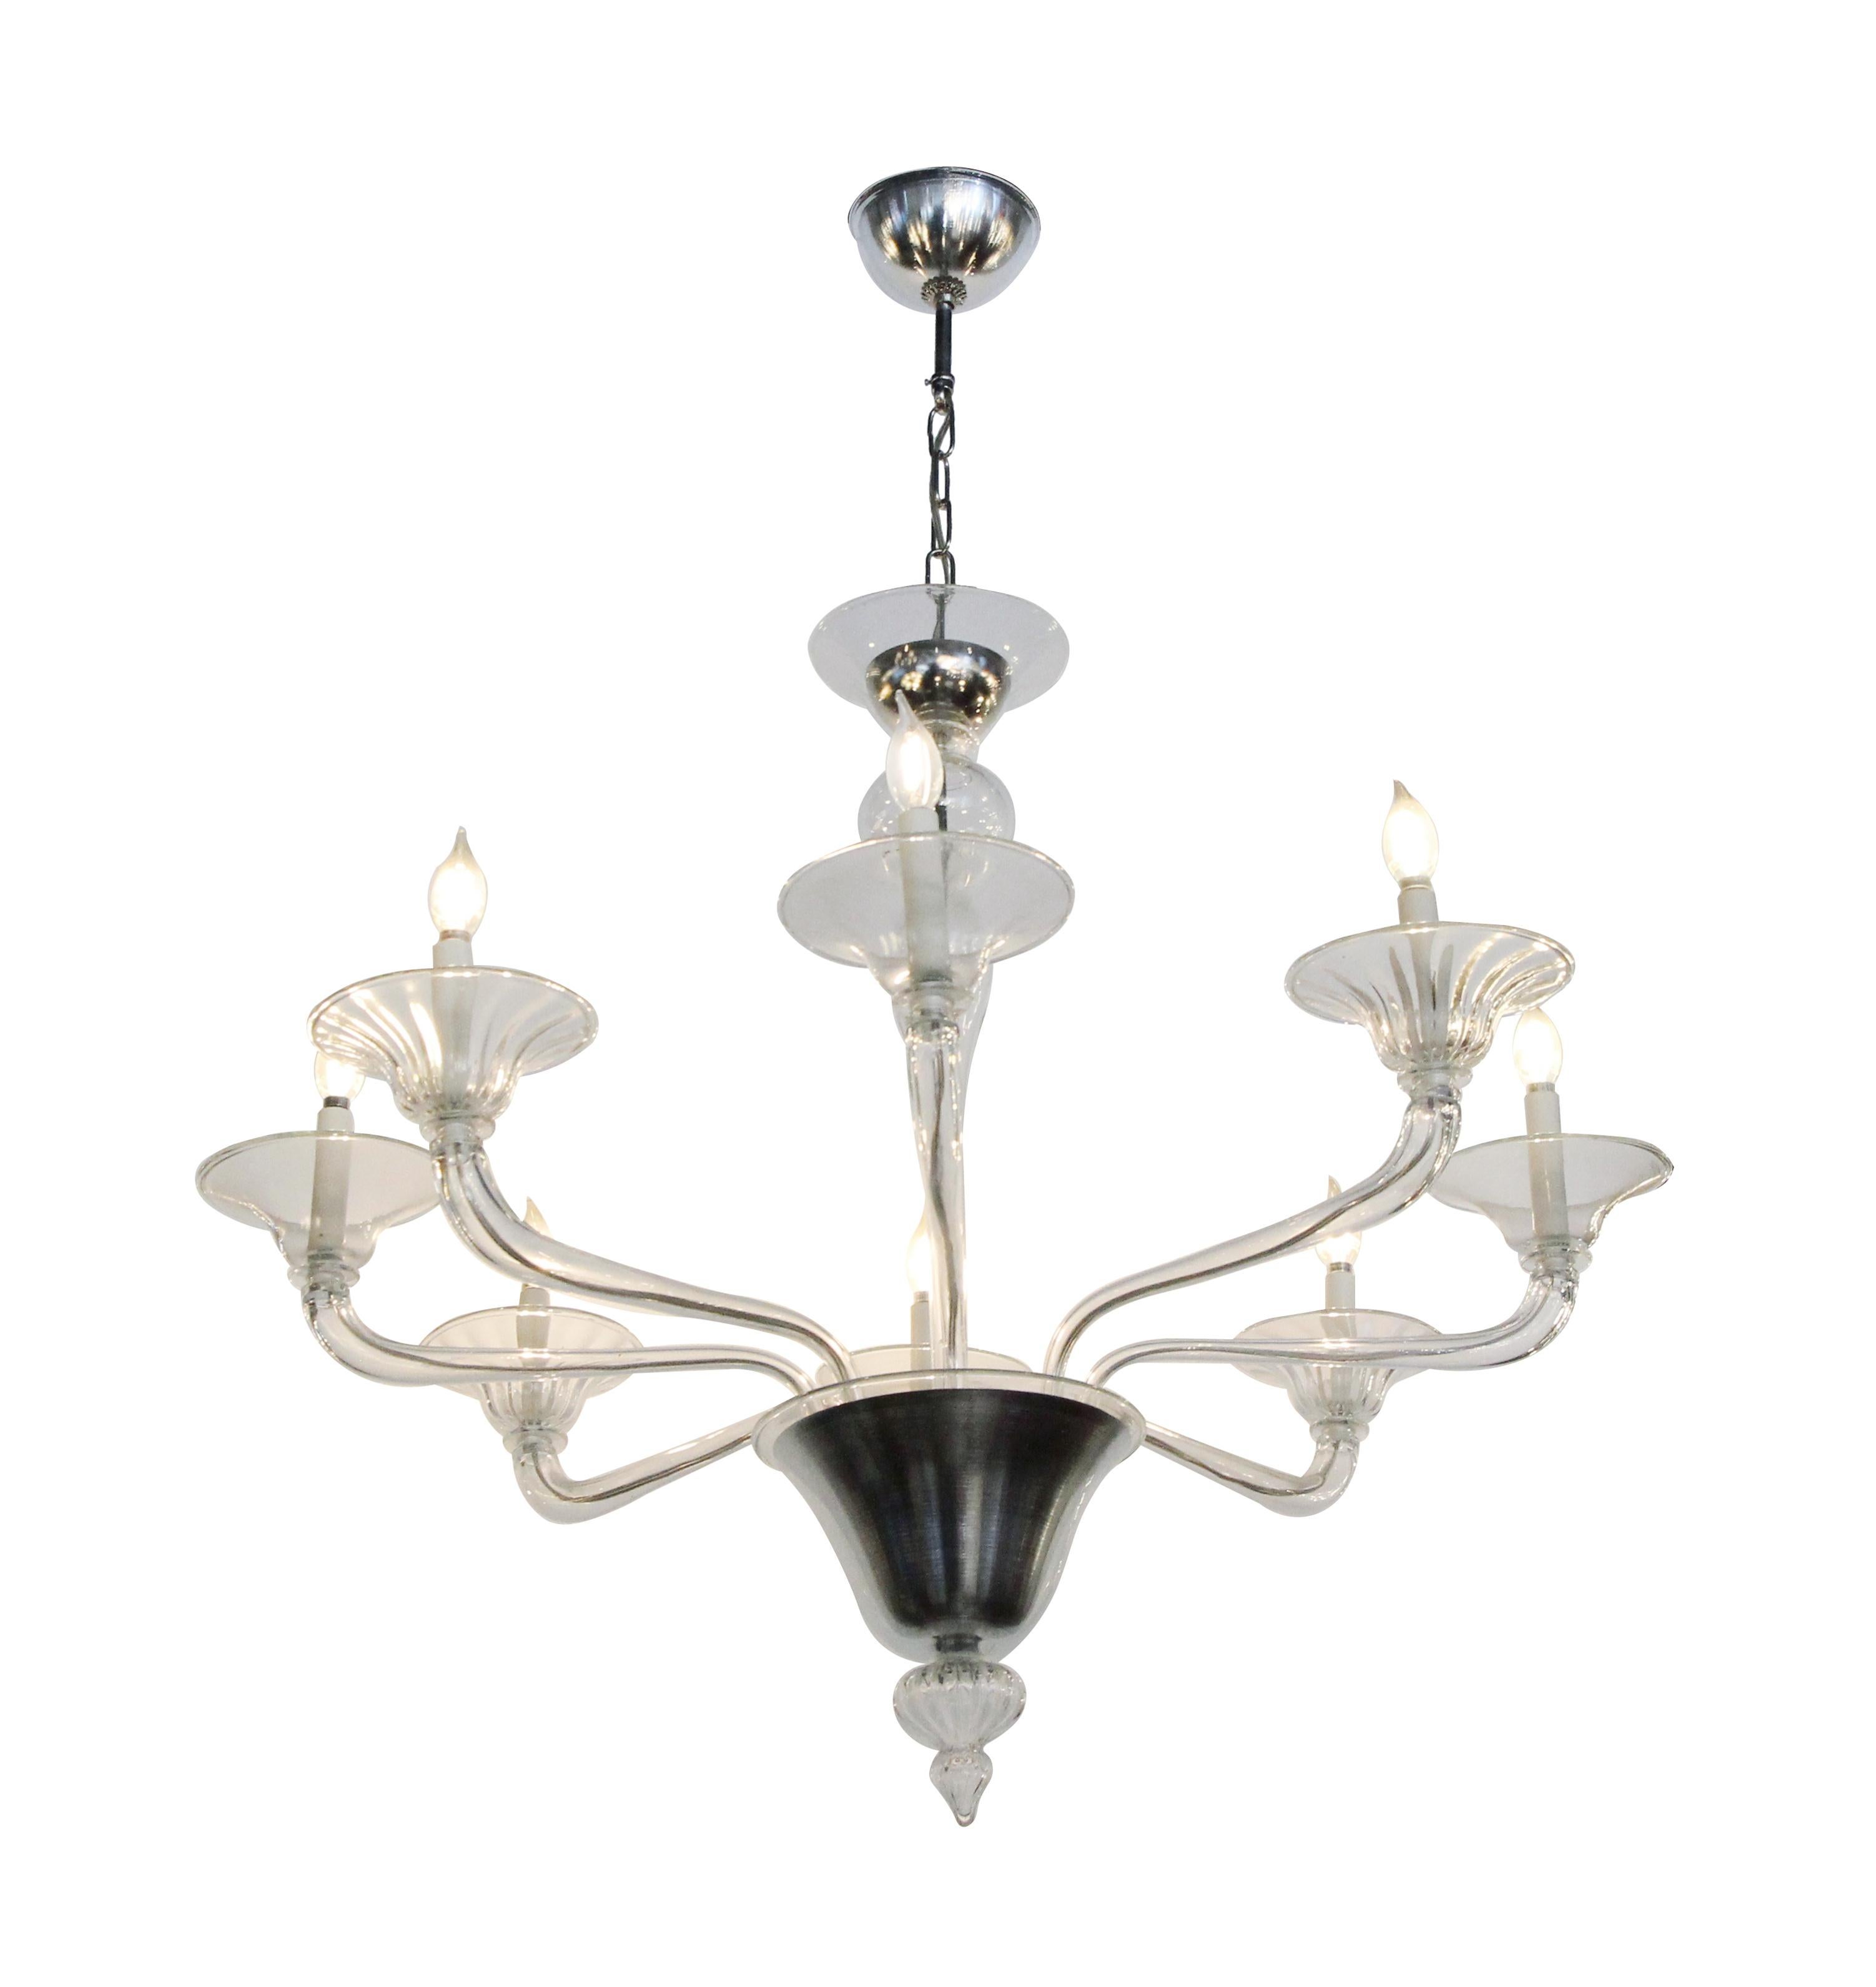 Mid-Century Modern style eight-arm chandelier made of glass and steel with a brushed finish. This can be seen at our 2420 Broadway location on the upper west side in Manhattan.